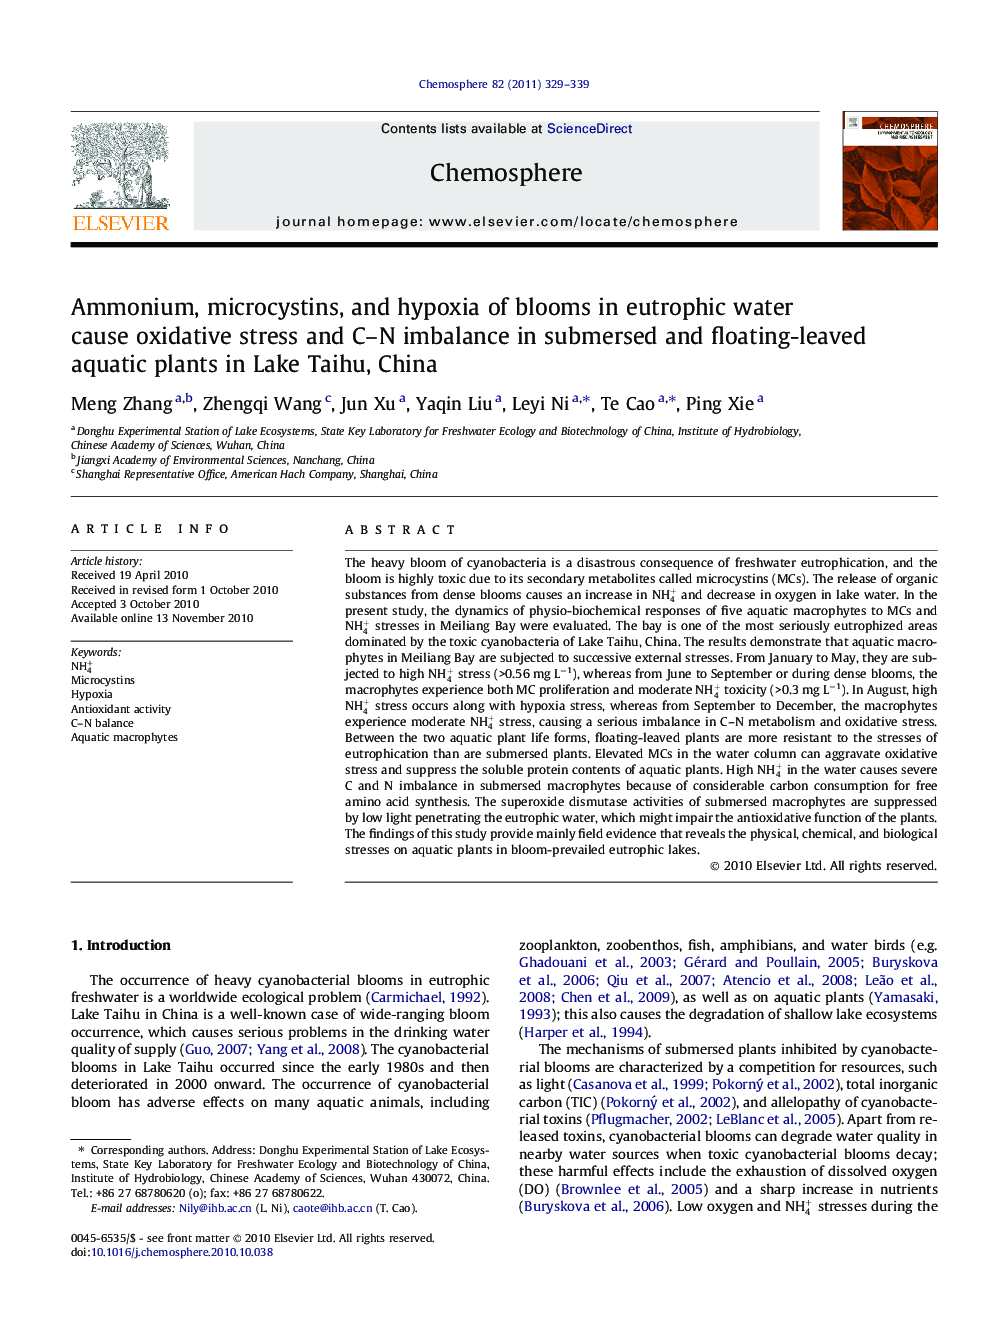 Ammonium, microcystins, and hypoxia of blooms in eutrophic water cause oxidative stress and C–N imbalance in submersed and floating-leaved aquatic plants in Lake Taihu, China